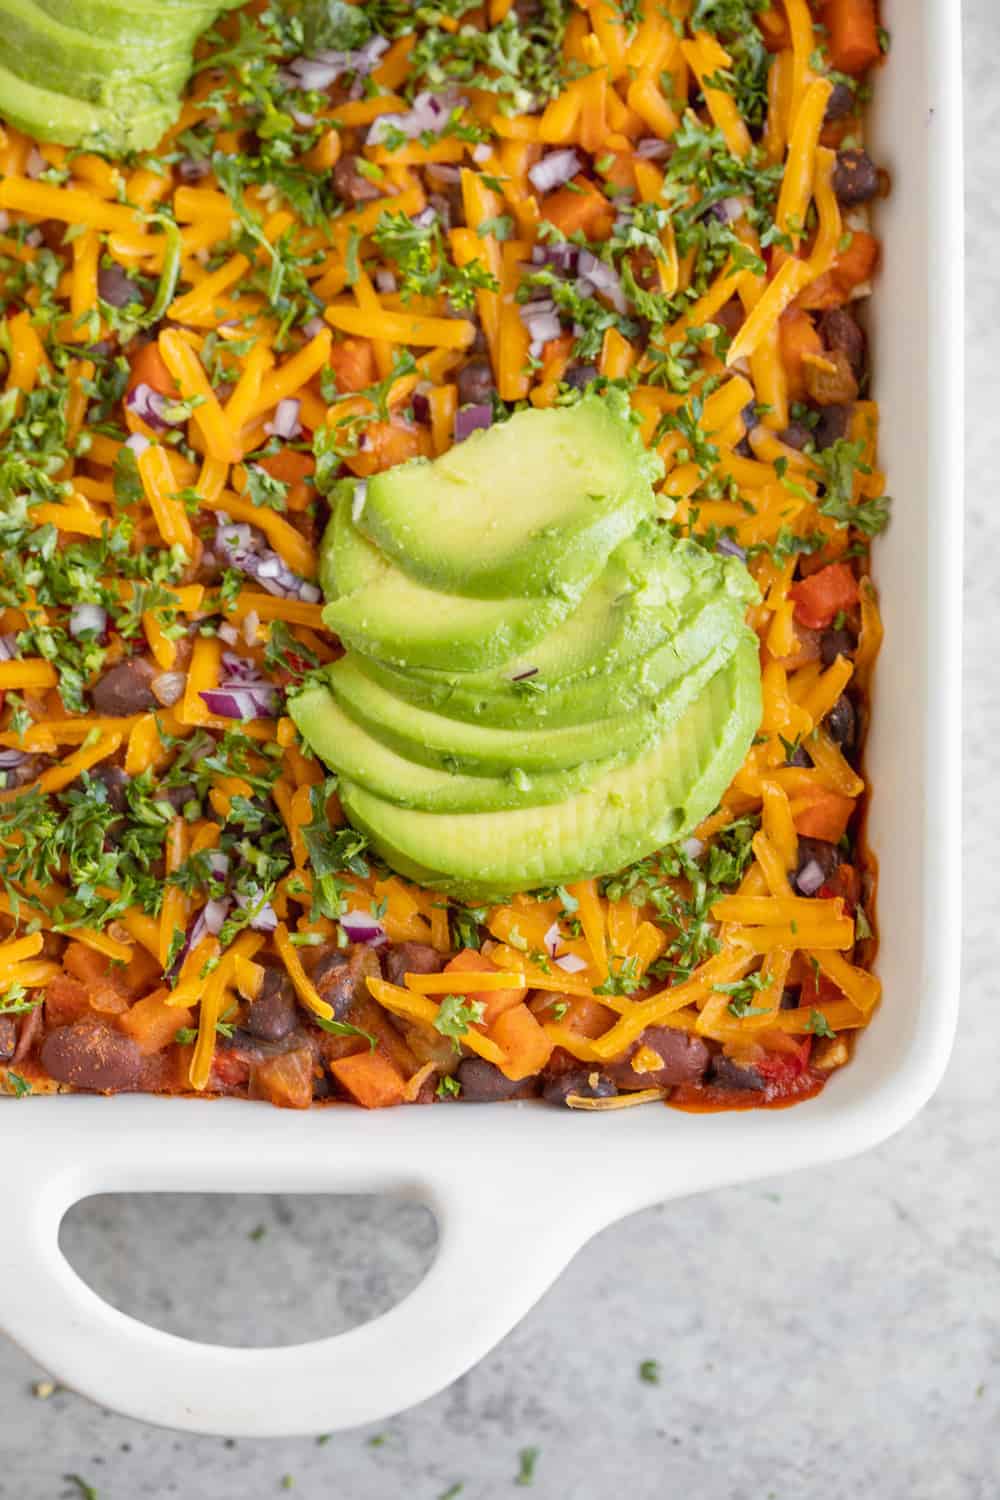 A 60-recipe vegan casserole collection featuring avocado and black beans.